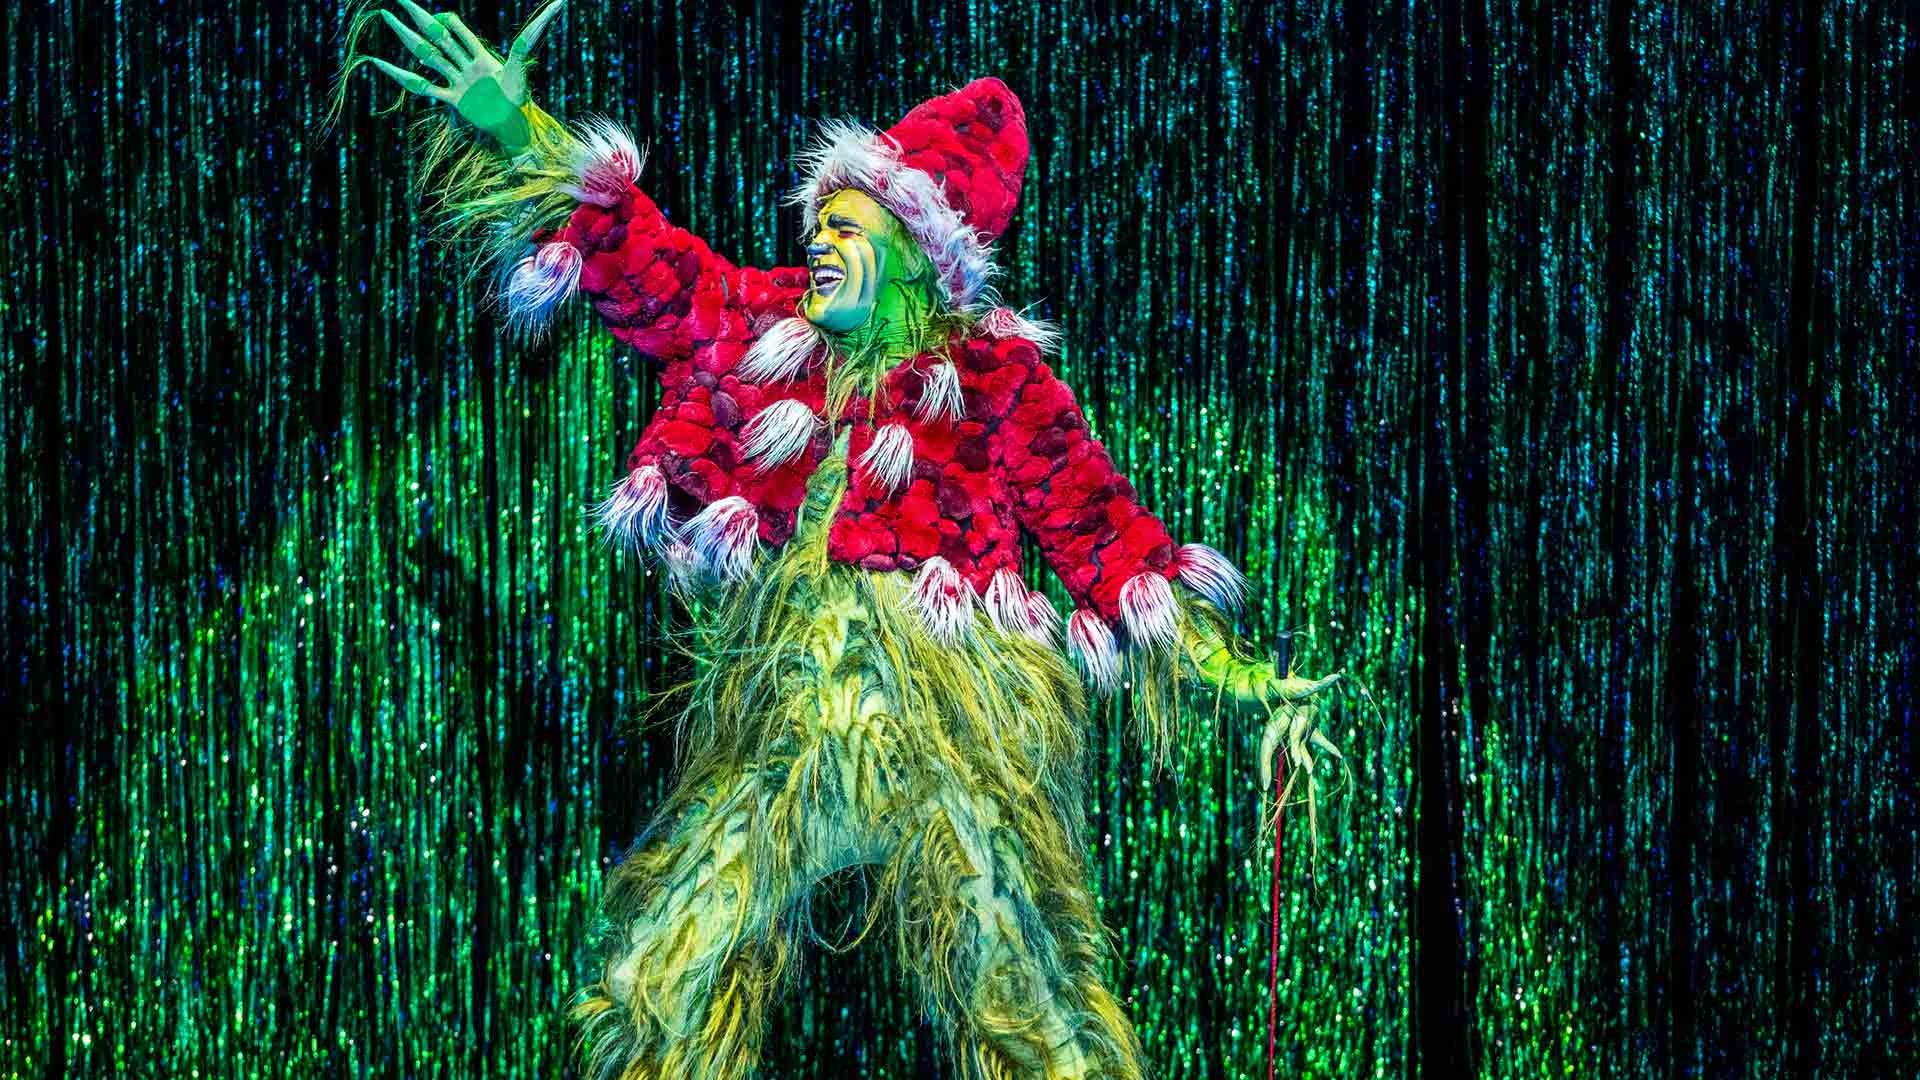 1920x1080 The Grinch is Stealing Christmas 2019